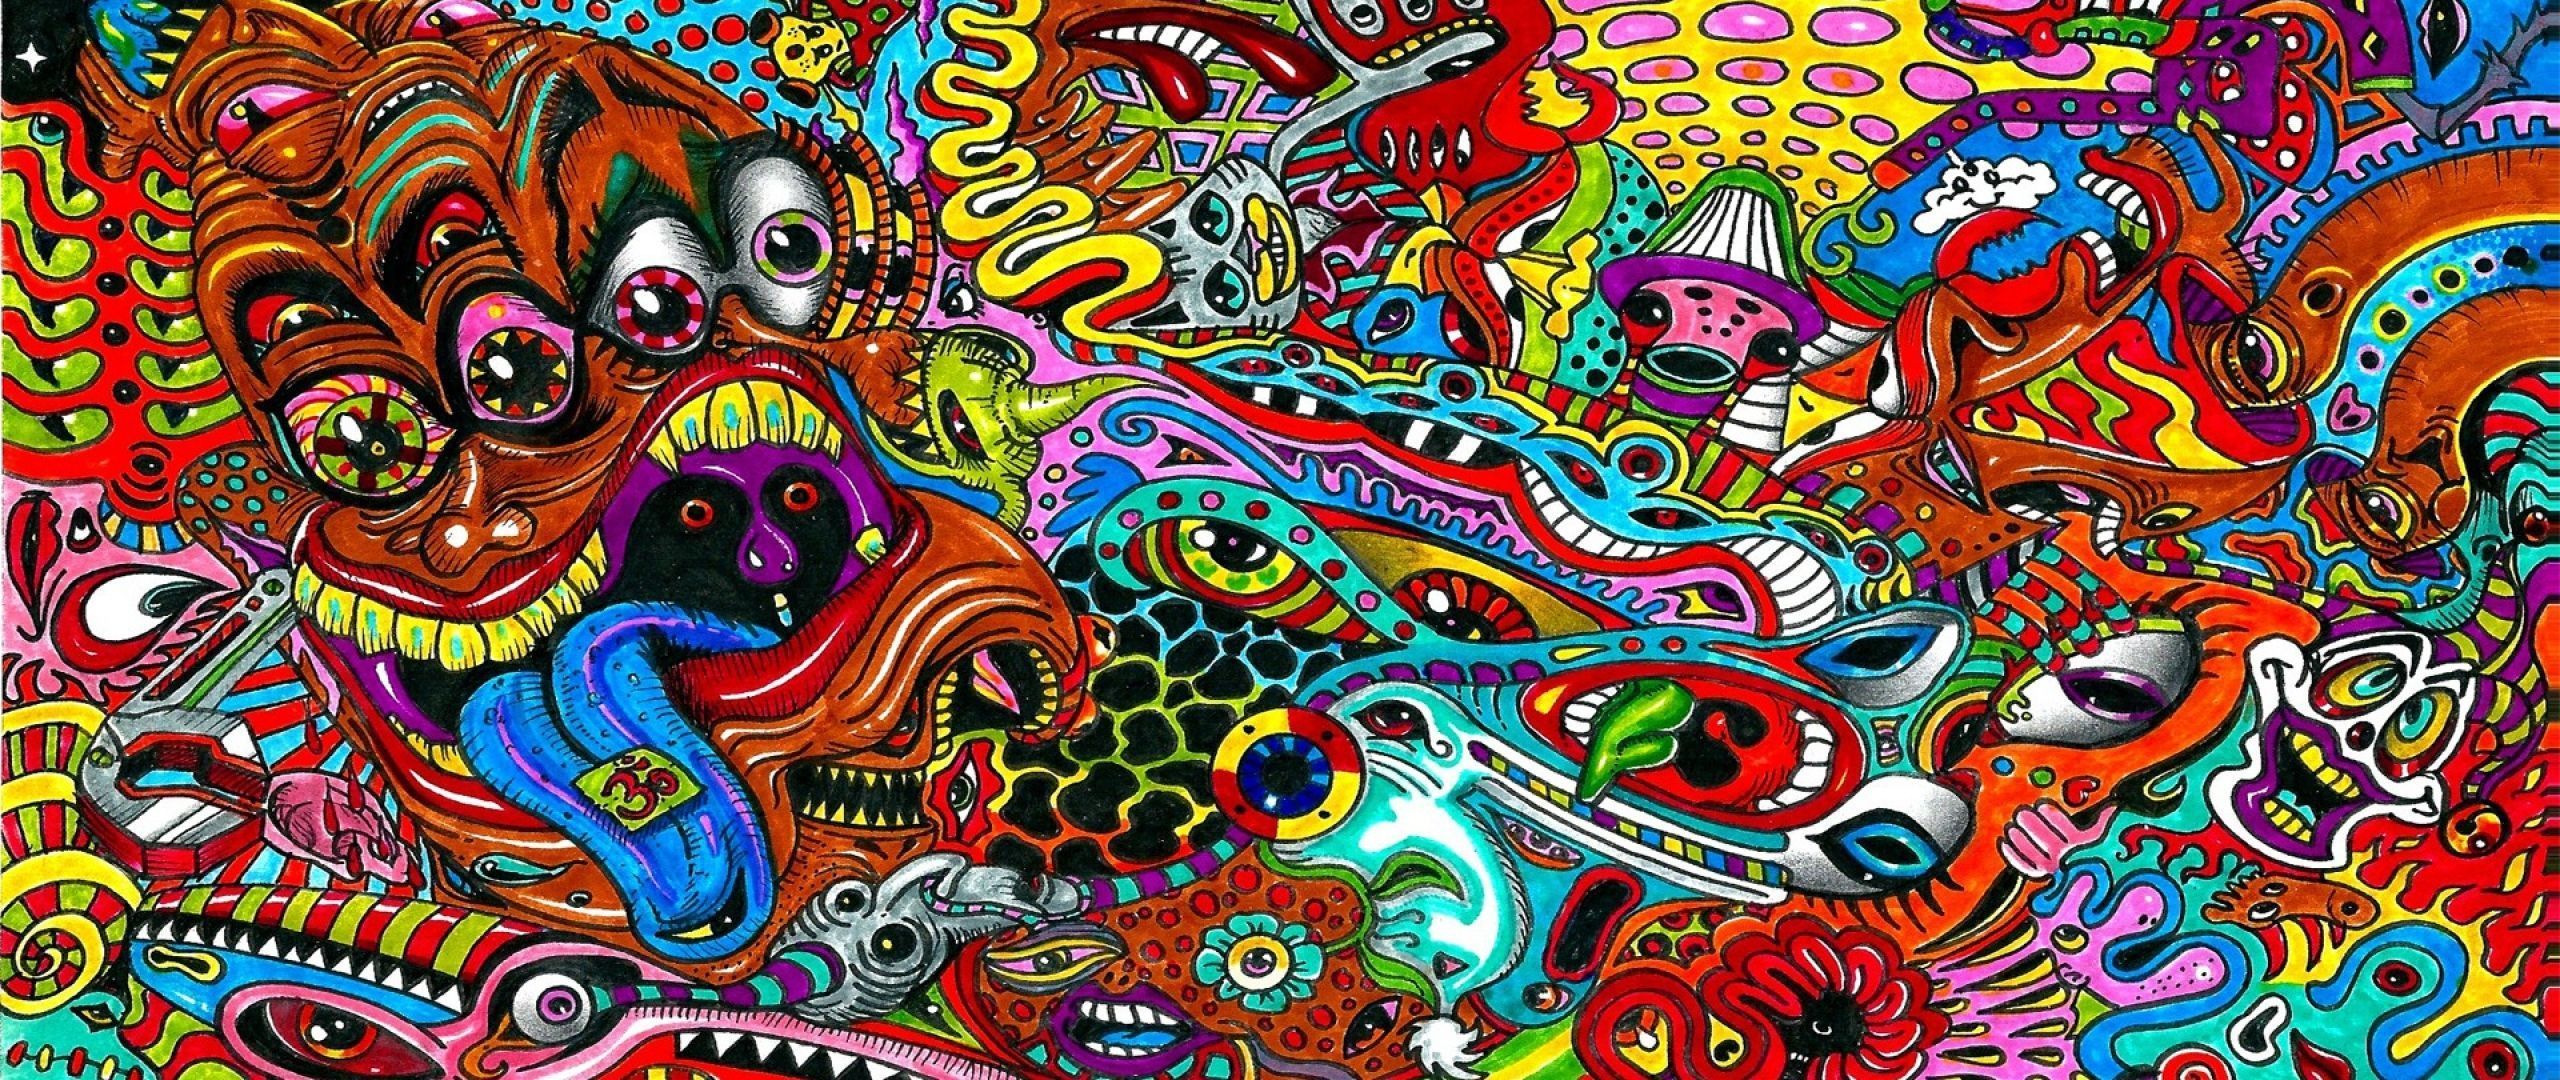 Download Wallpaper 2560x1080 Drawing, Surreal, Colorful ...